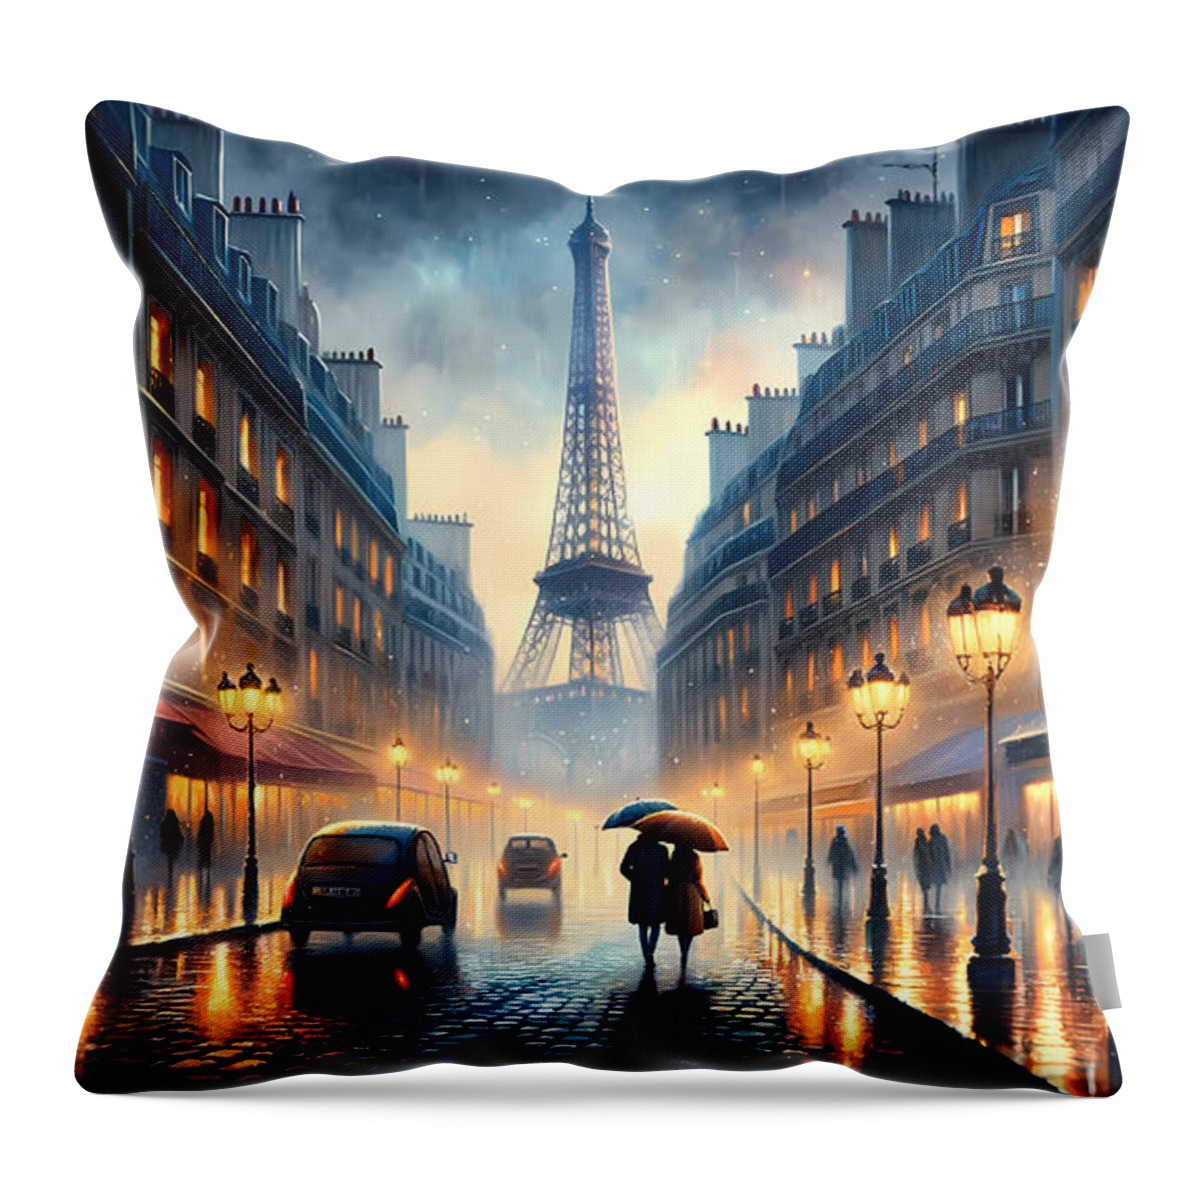 Paris Throw Pillow featuring the digital art Parisian Streets in Rain, A romantic rainy scene on the streets of Paris with the Eiffel Tower by Jeff Creation